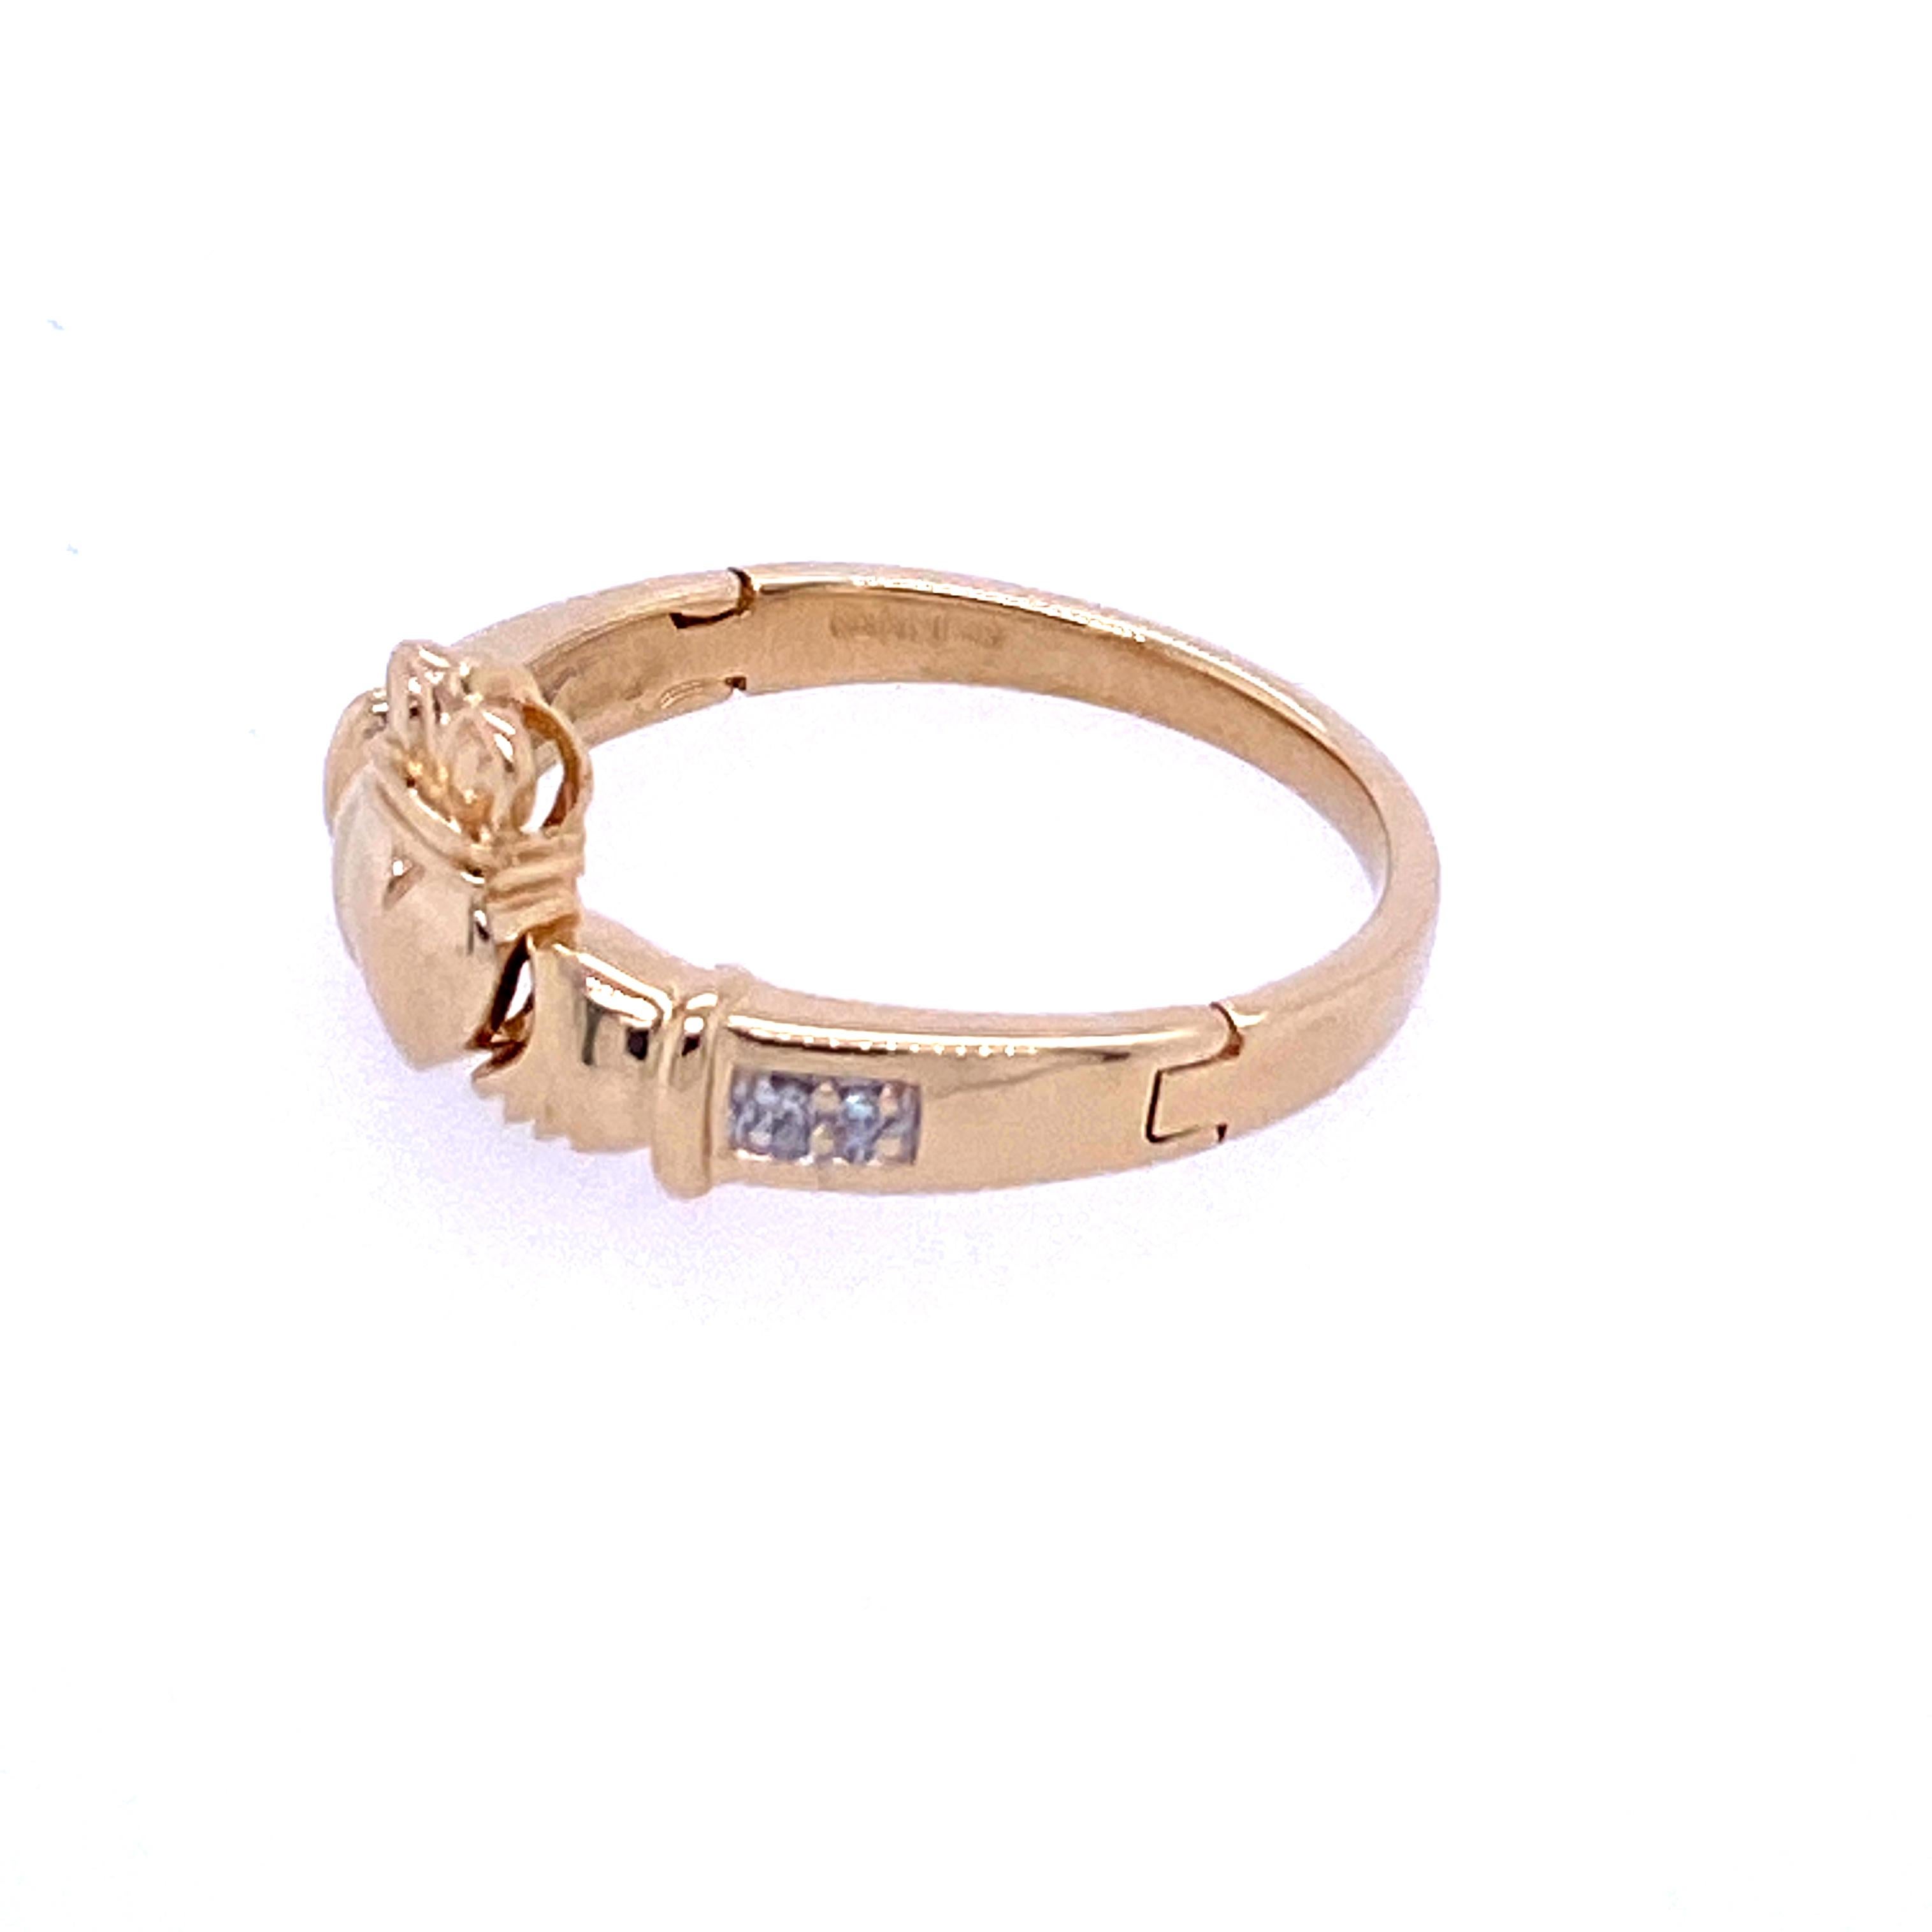 One 14 karat yellow gold (stamped SD 14 585 IRELAND)  Claddagh ring bead set with four single cut diamonds approximately 0.06 carat total weight with matching I/J color and S1/SI2 clarity. The ring features hinged shoulders which open to disclose a